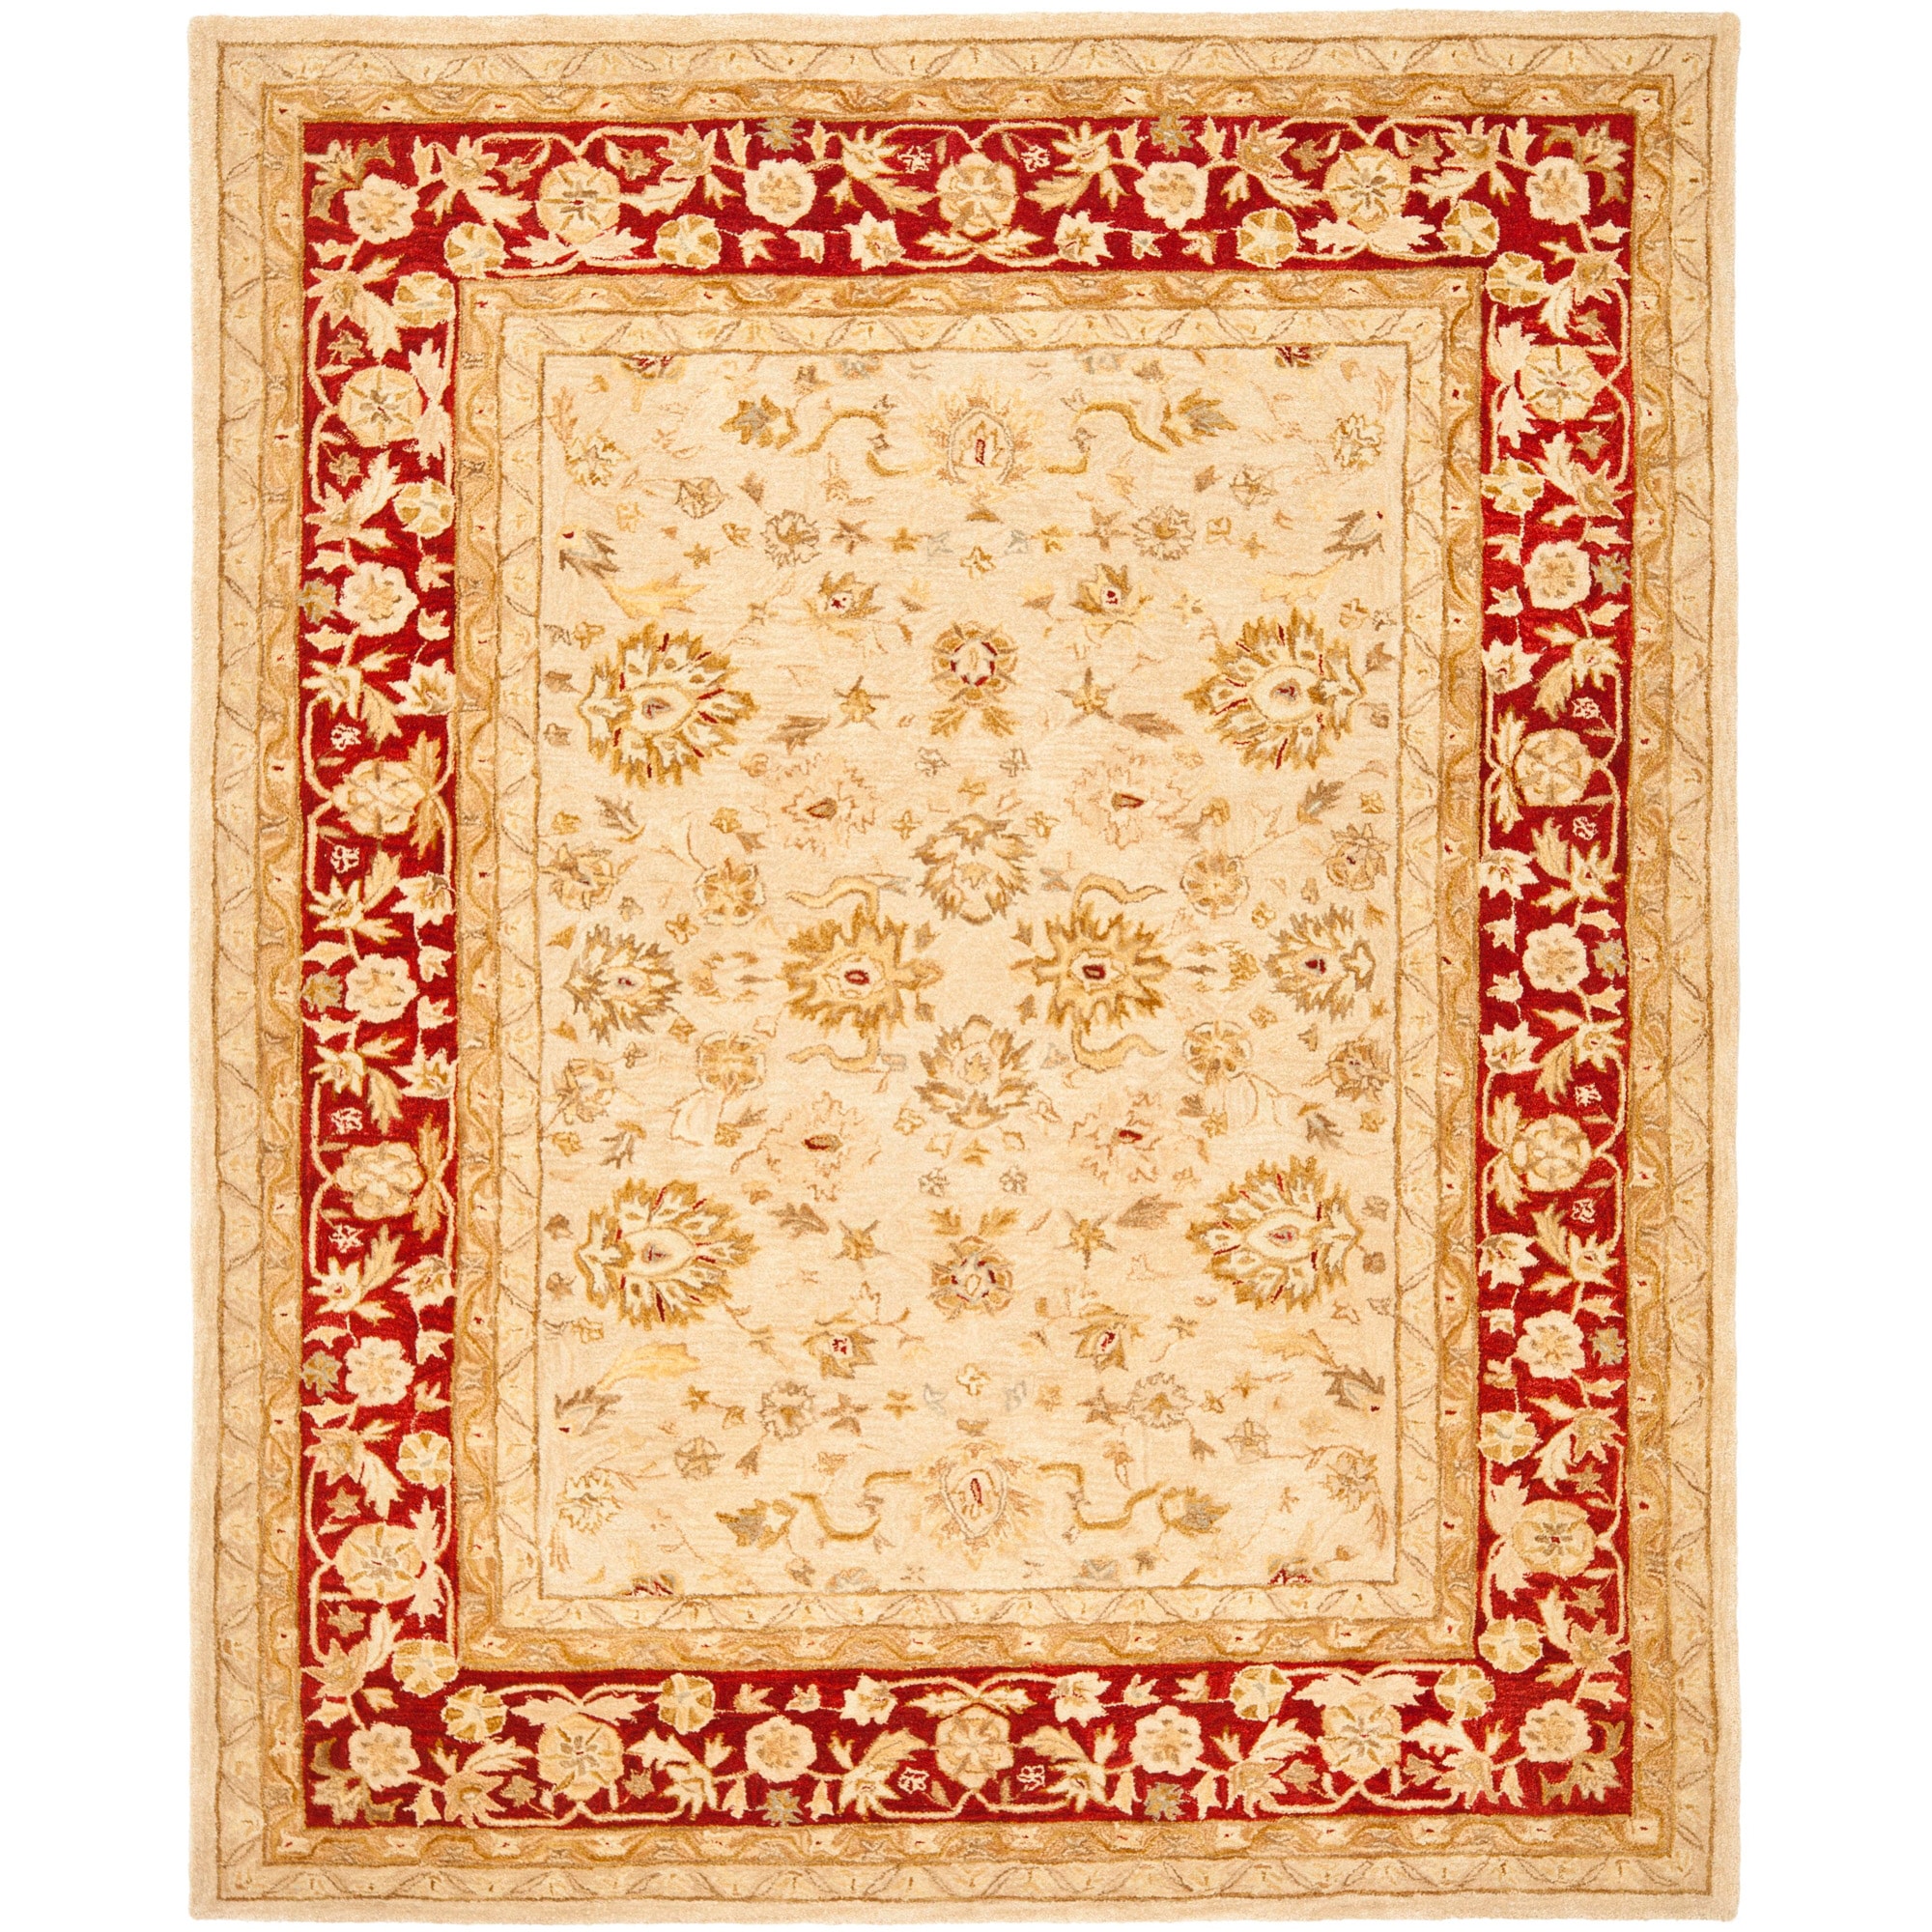 Handmade Ancestry Ivory/ Red Wool Rug (5 X 8) (IvoryPattern OrientalMeasures 0.625 inch thickTip We recommend the use of a non skid pad to keep the rug in place on smooth surfaces.All rug sizes are approximate. Due to the difference of monitor colors, s